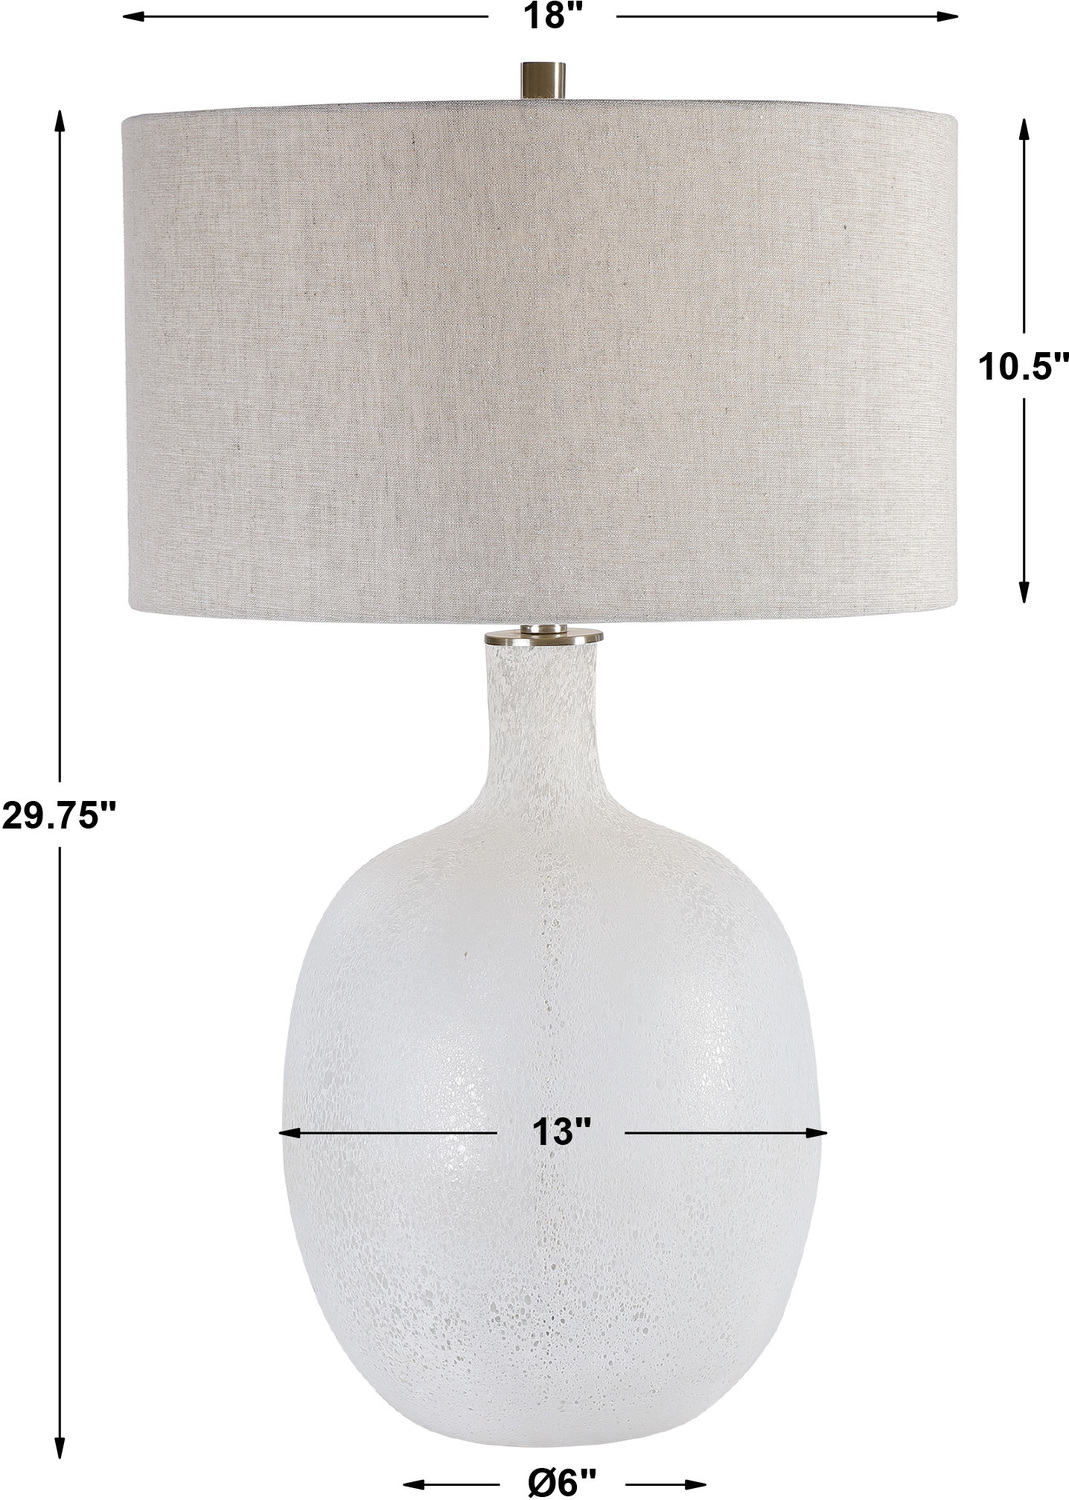 best led desk light Uttermost White Mottled Glass Table Lamp Beautiful And Functional, This Table Lamp Features A Glass Base Finished In A Heavily Textured, Mottled Aged White, Accented By Brushed Nickel Plated Details.